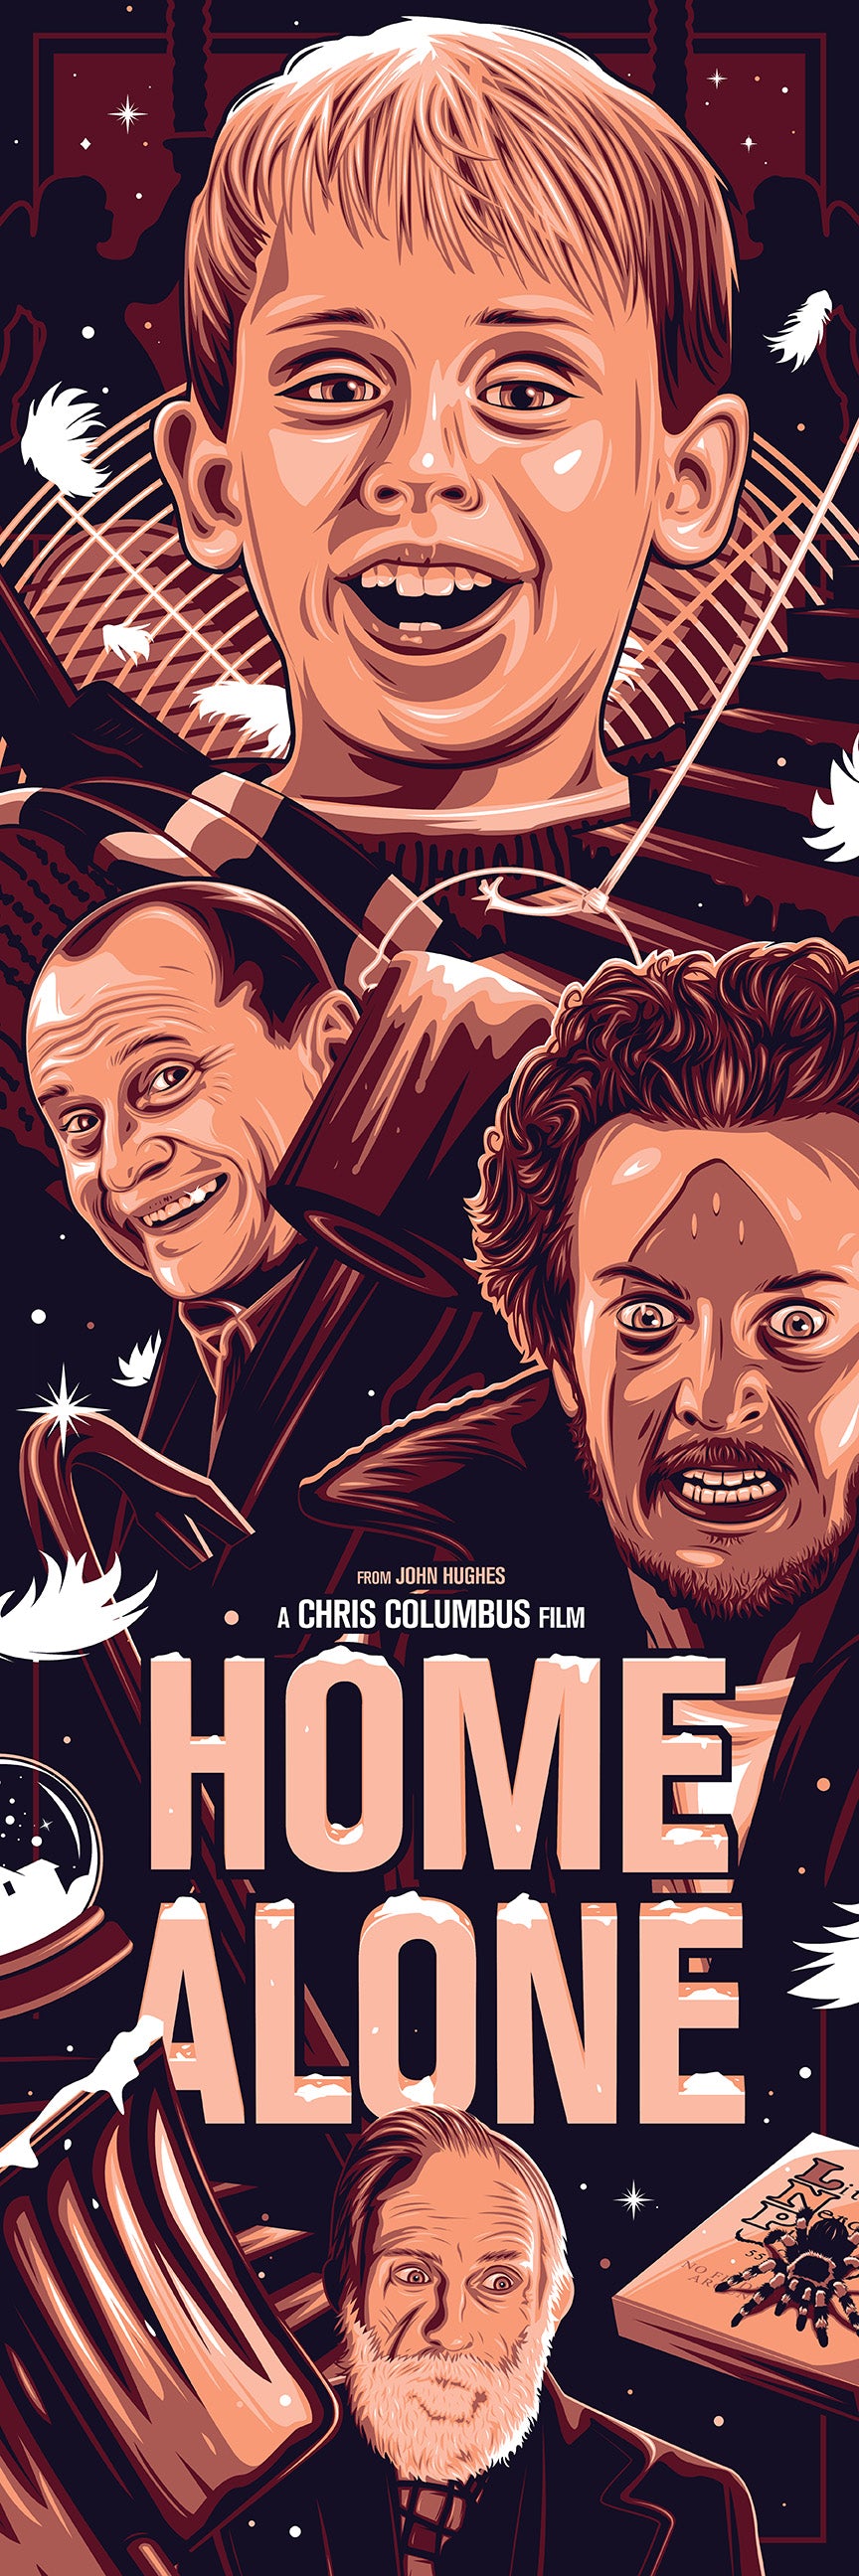 "Home Alone" by Dave Stafford